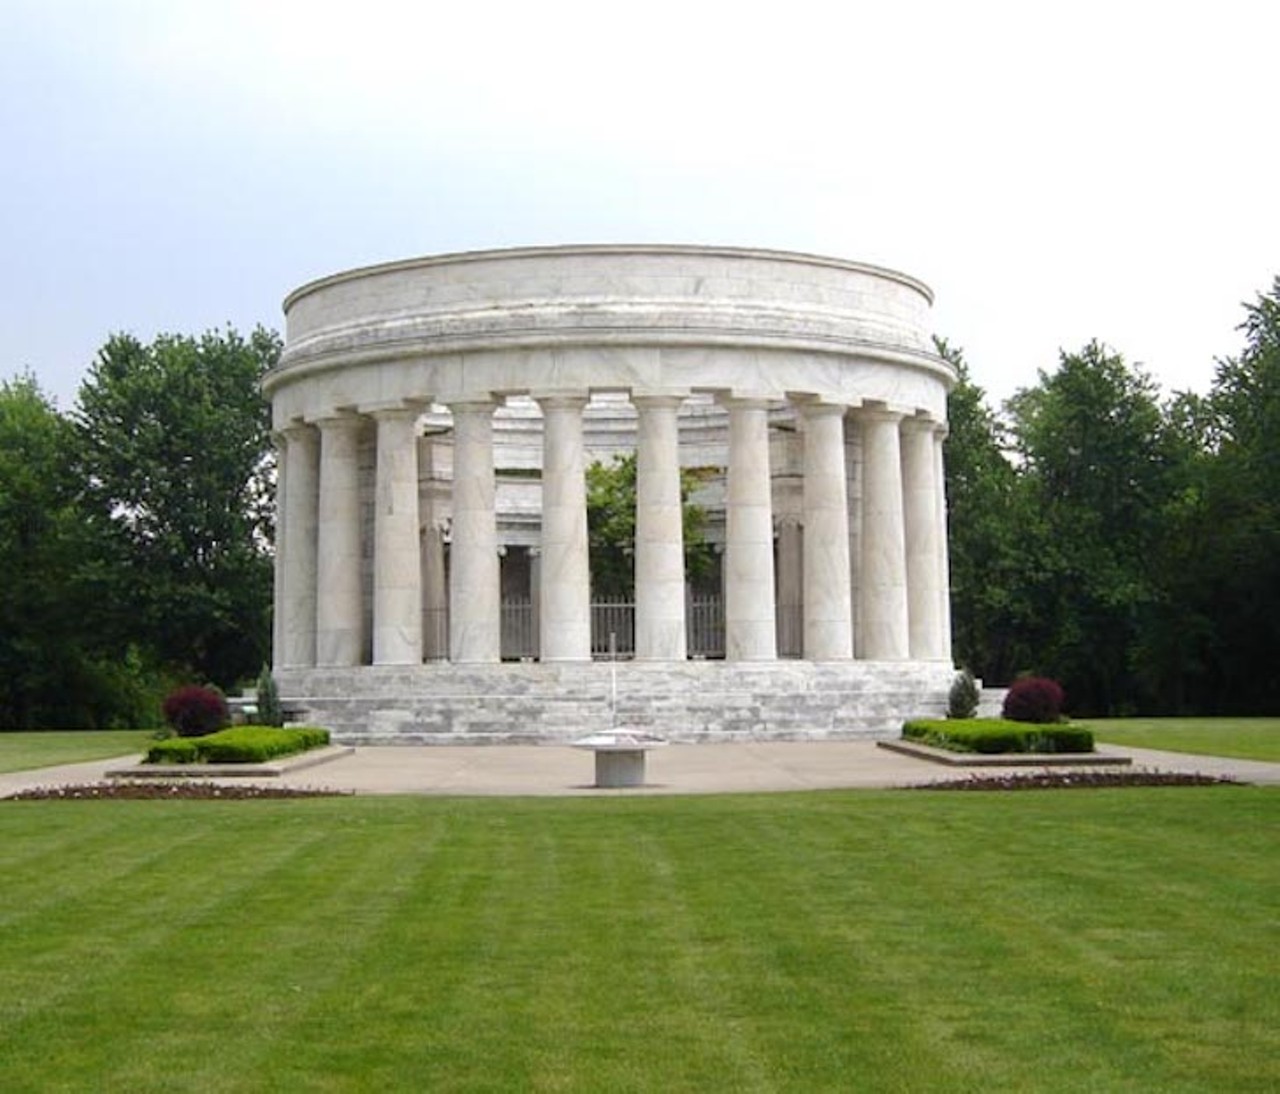 Warren G. Harding
Harding Tomb, Marion
Our 29th president, Harding was popular until scandals like the Teapot Dome Scandal came to light after he died. He is now considered one of our worst presidents.
Photo via Mike Sharp/Wikimedia Commons